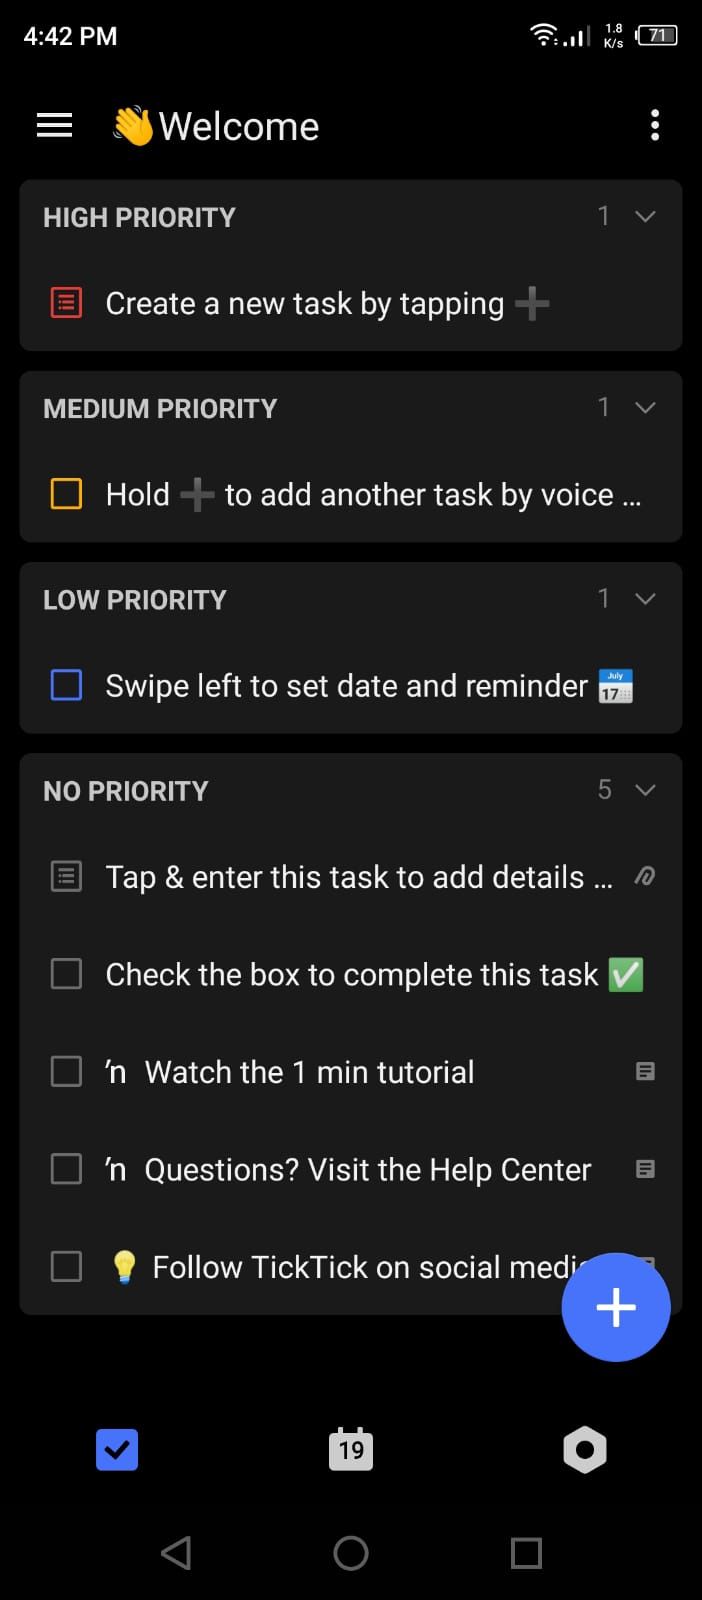 TickTick - List Sorted by Priority